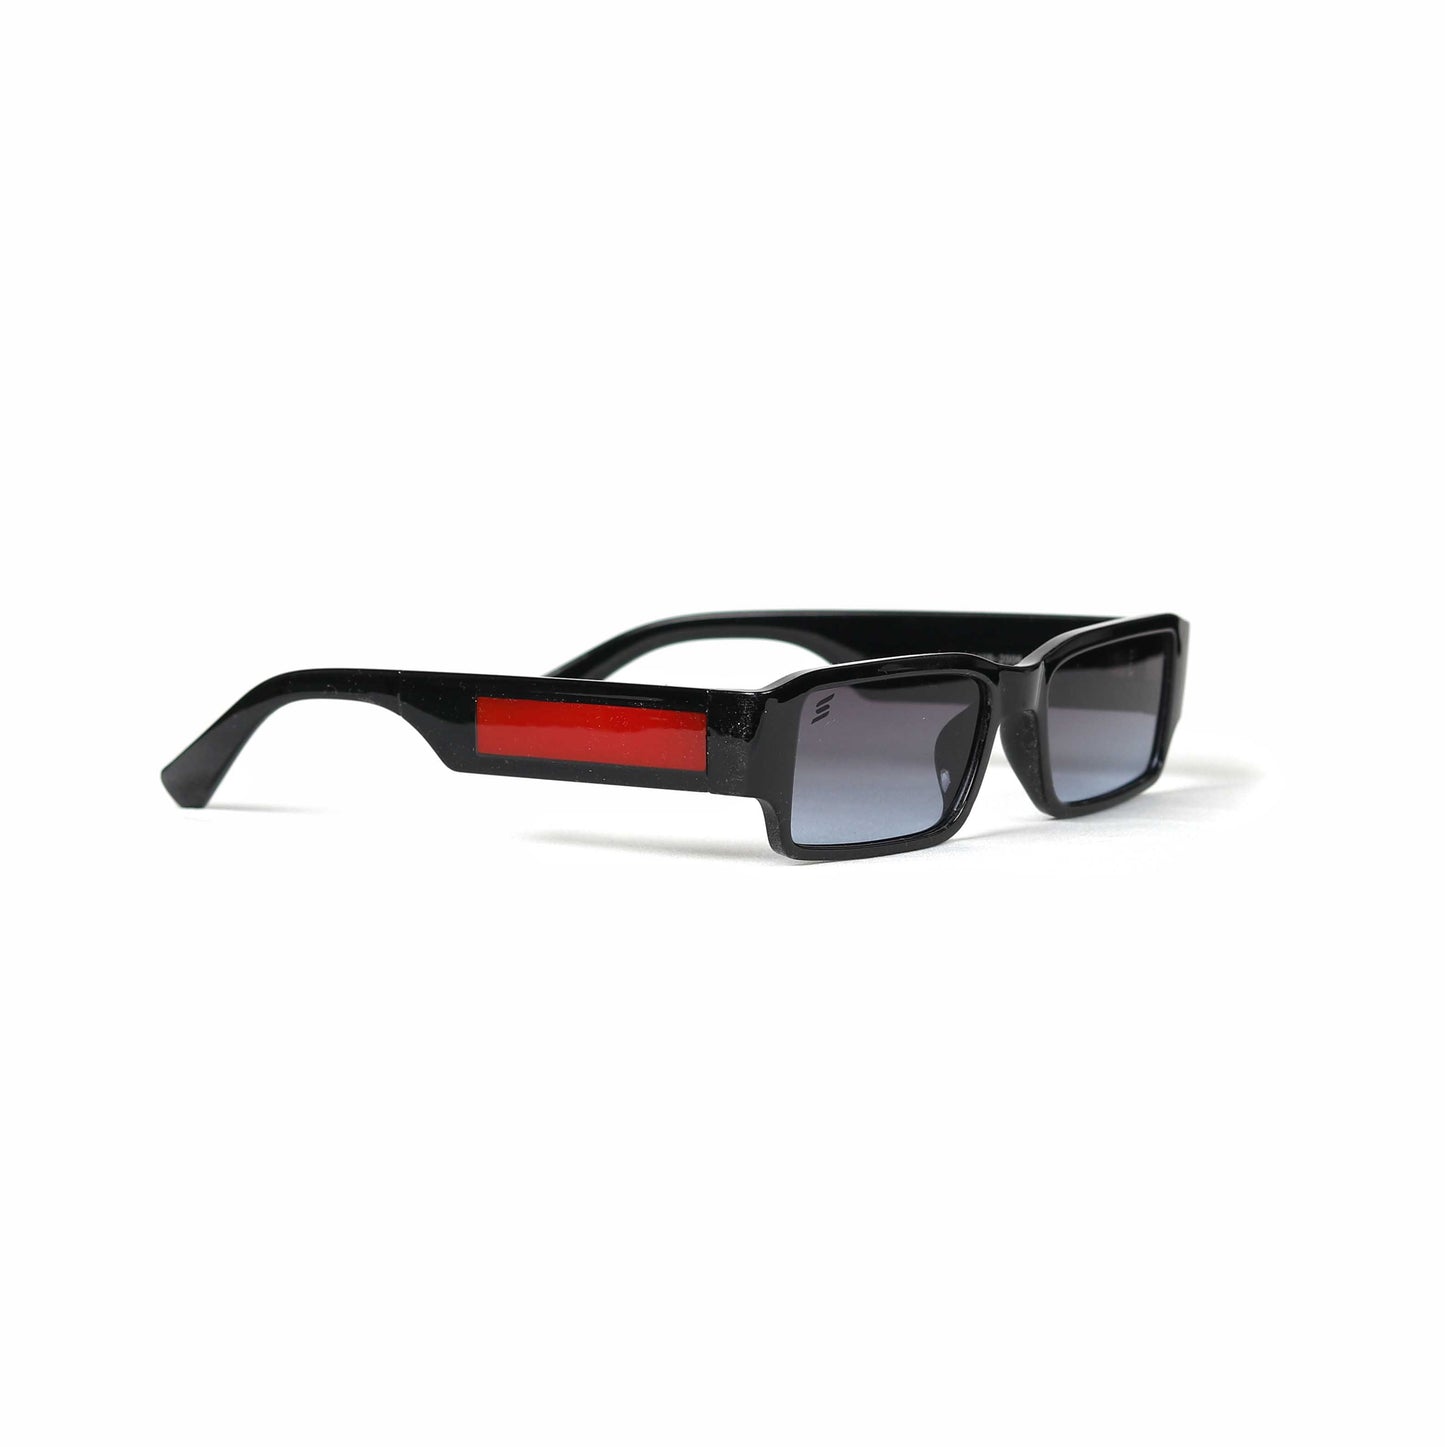 Espiars Rectangle PC shades (black/red)